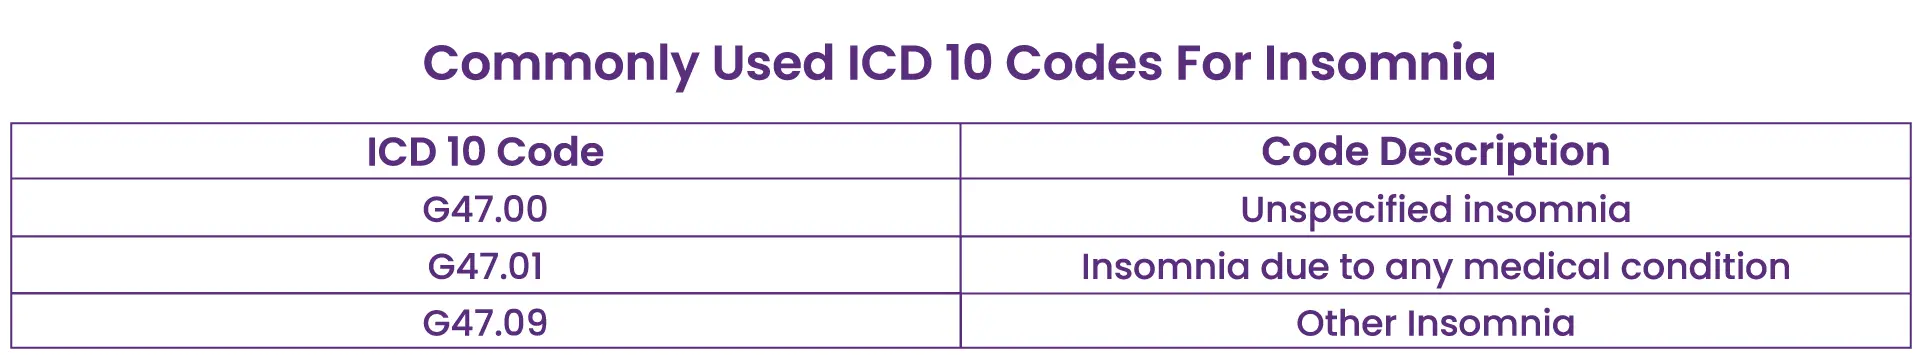   commonly-used-icd10-codes-for-insomnia